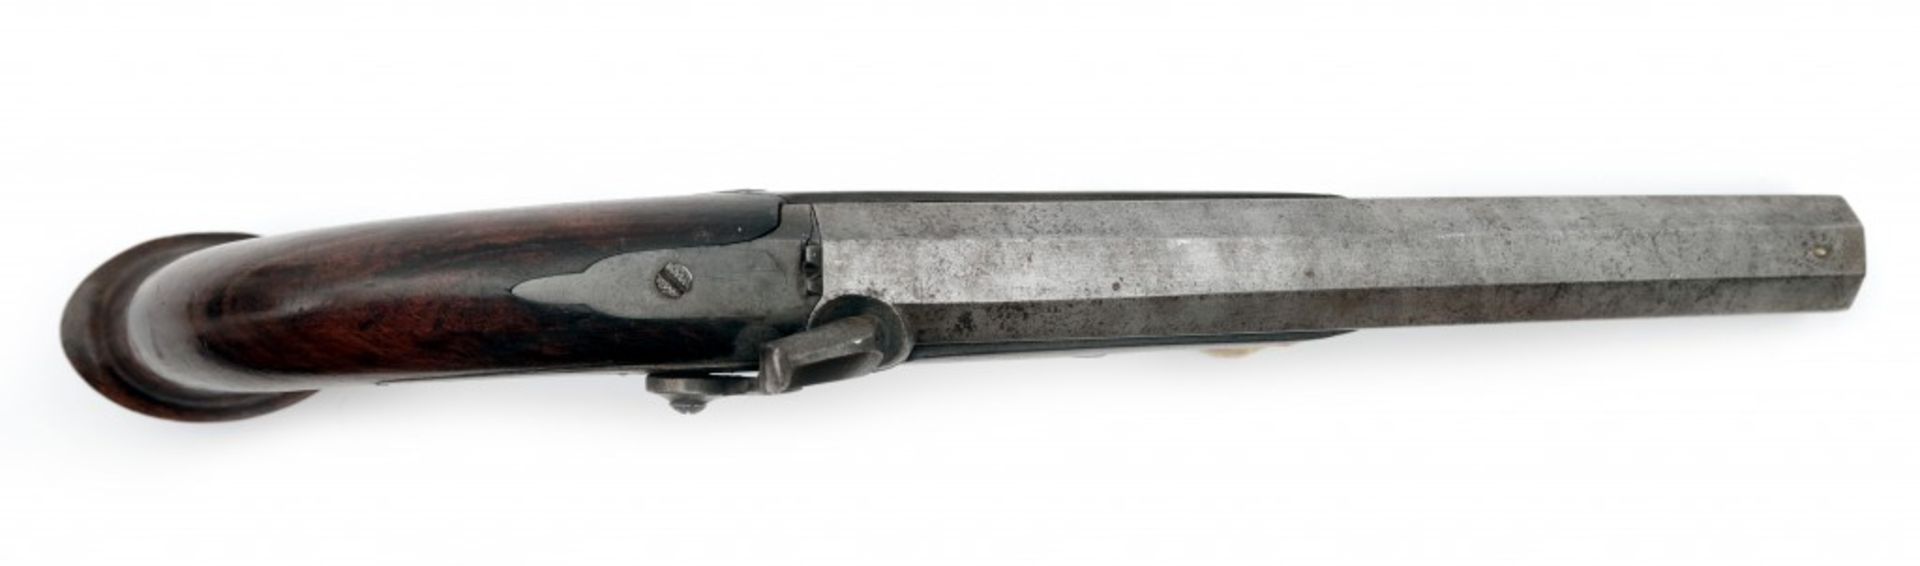 A Pair of French Officer´s Pistols< - Image 3 of 4